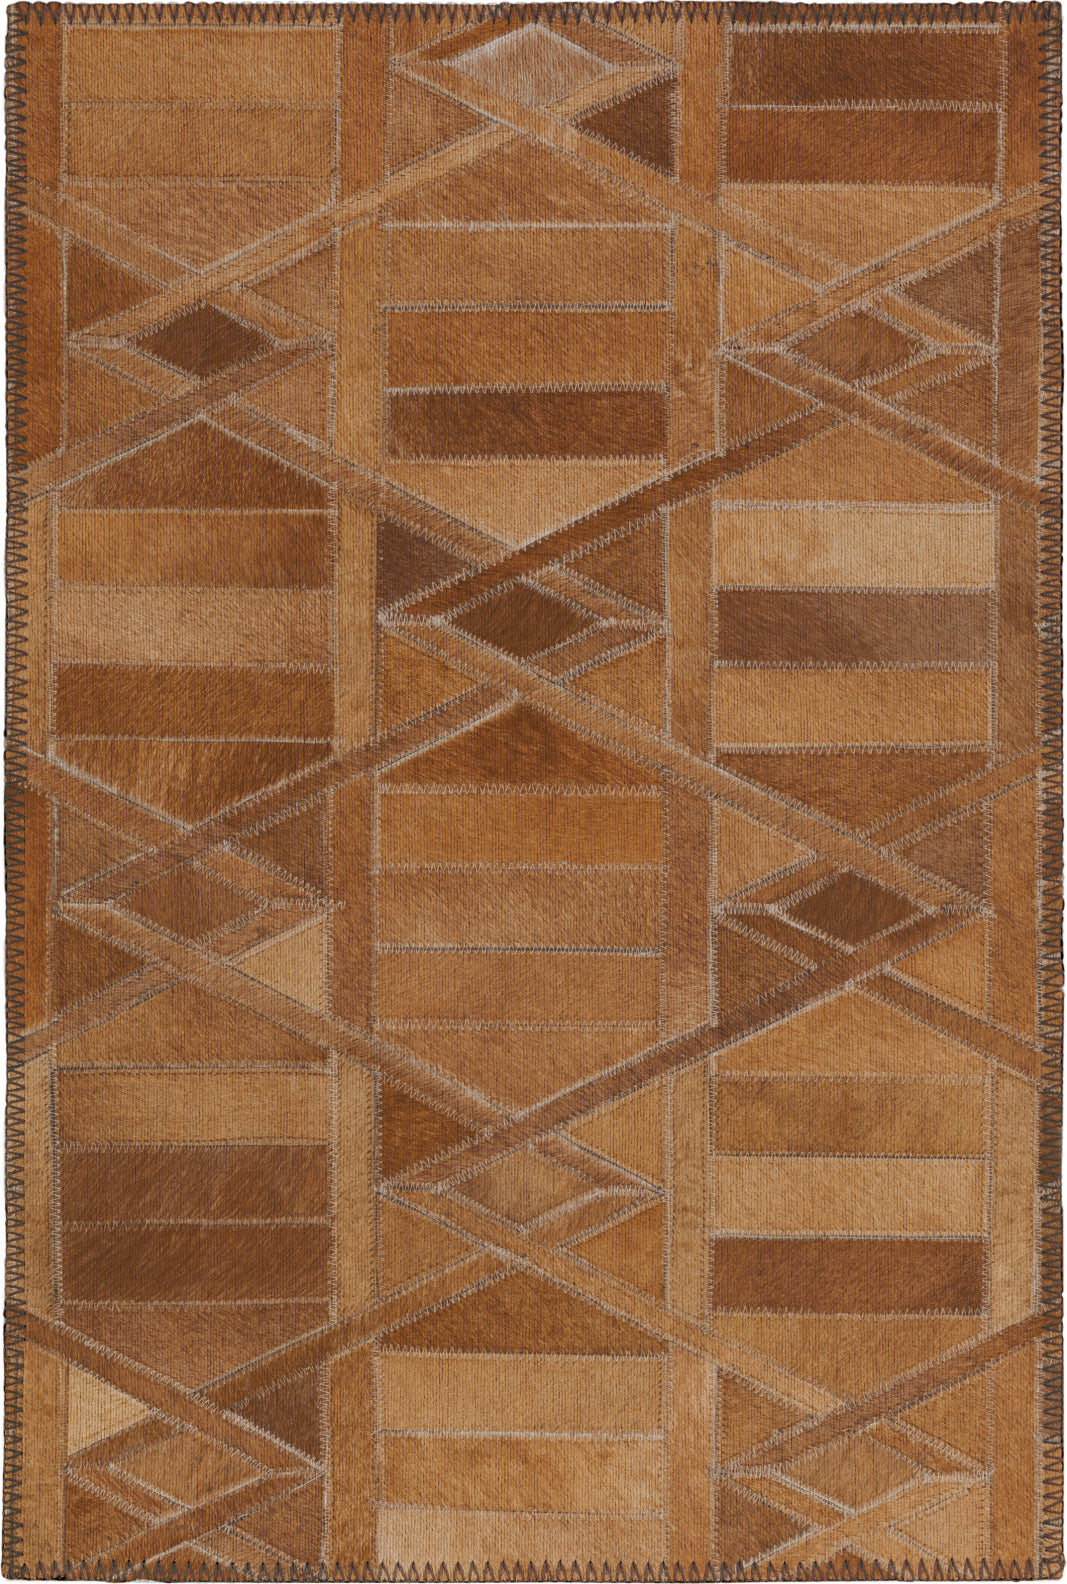 Dalyn Stetson SS4 Spice Area Rug main image